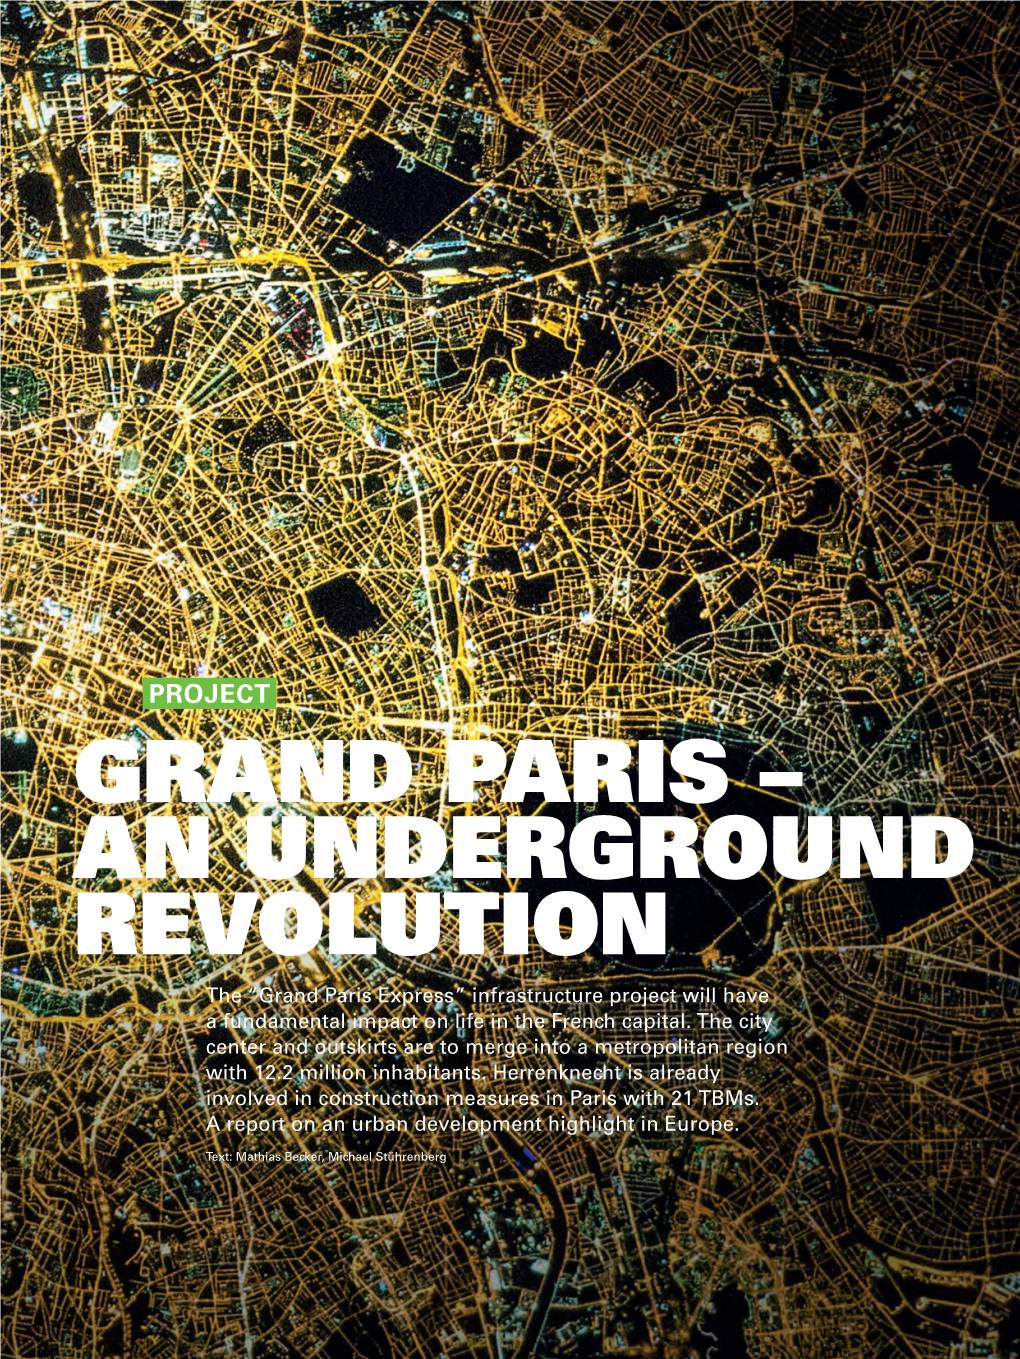 GRAND PARIS – an UNDERGROUND REVOLUTION the “Grand Paris Express” Infrastructure Project Will Have a Fundamental Impact on Life in the French Capital